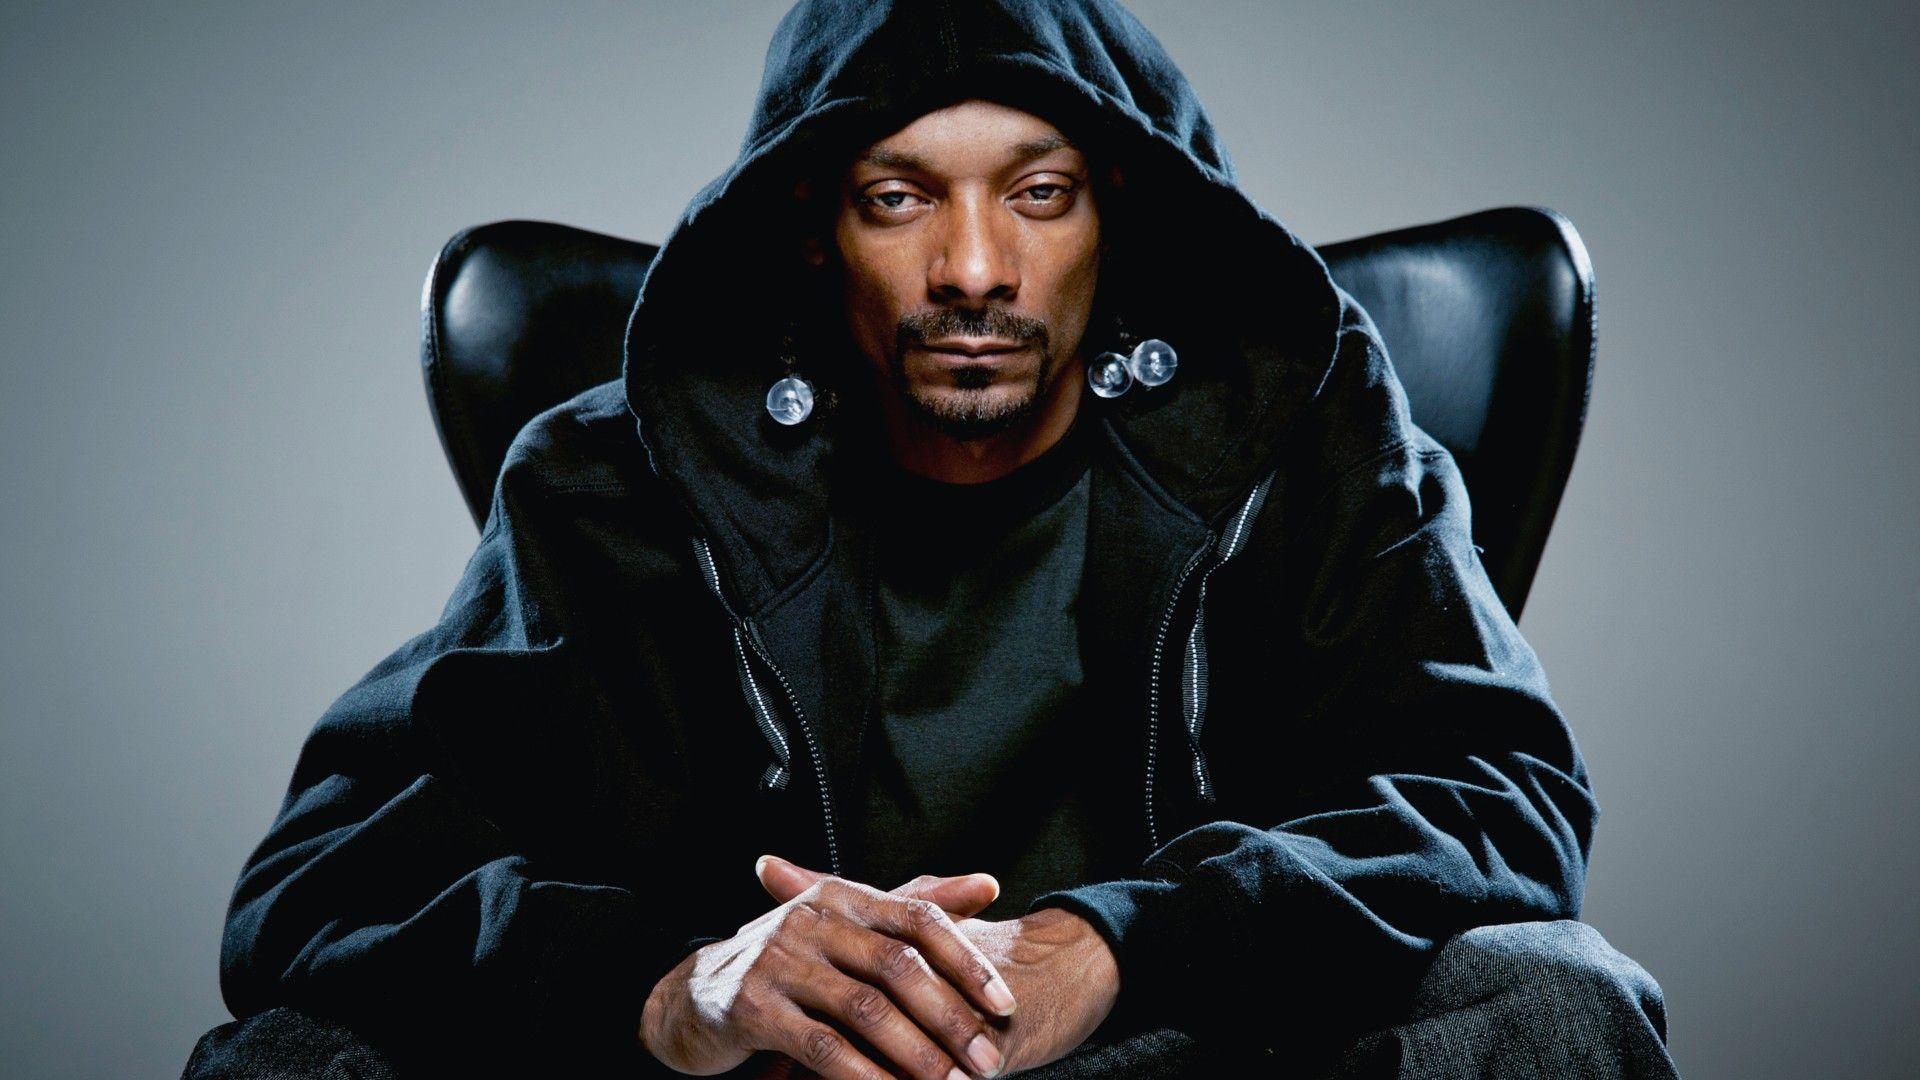 Snoop Dogg Weed Wallpapers - Top Free Snoop Dogg Weed Backgrounds